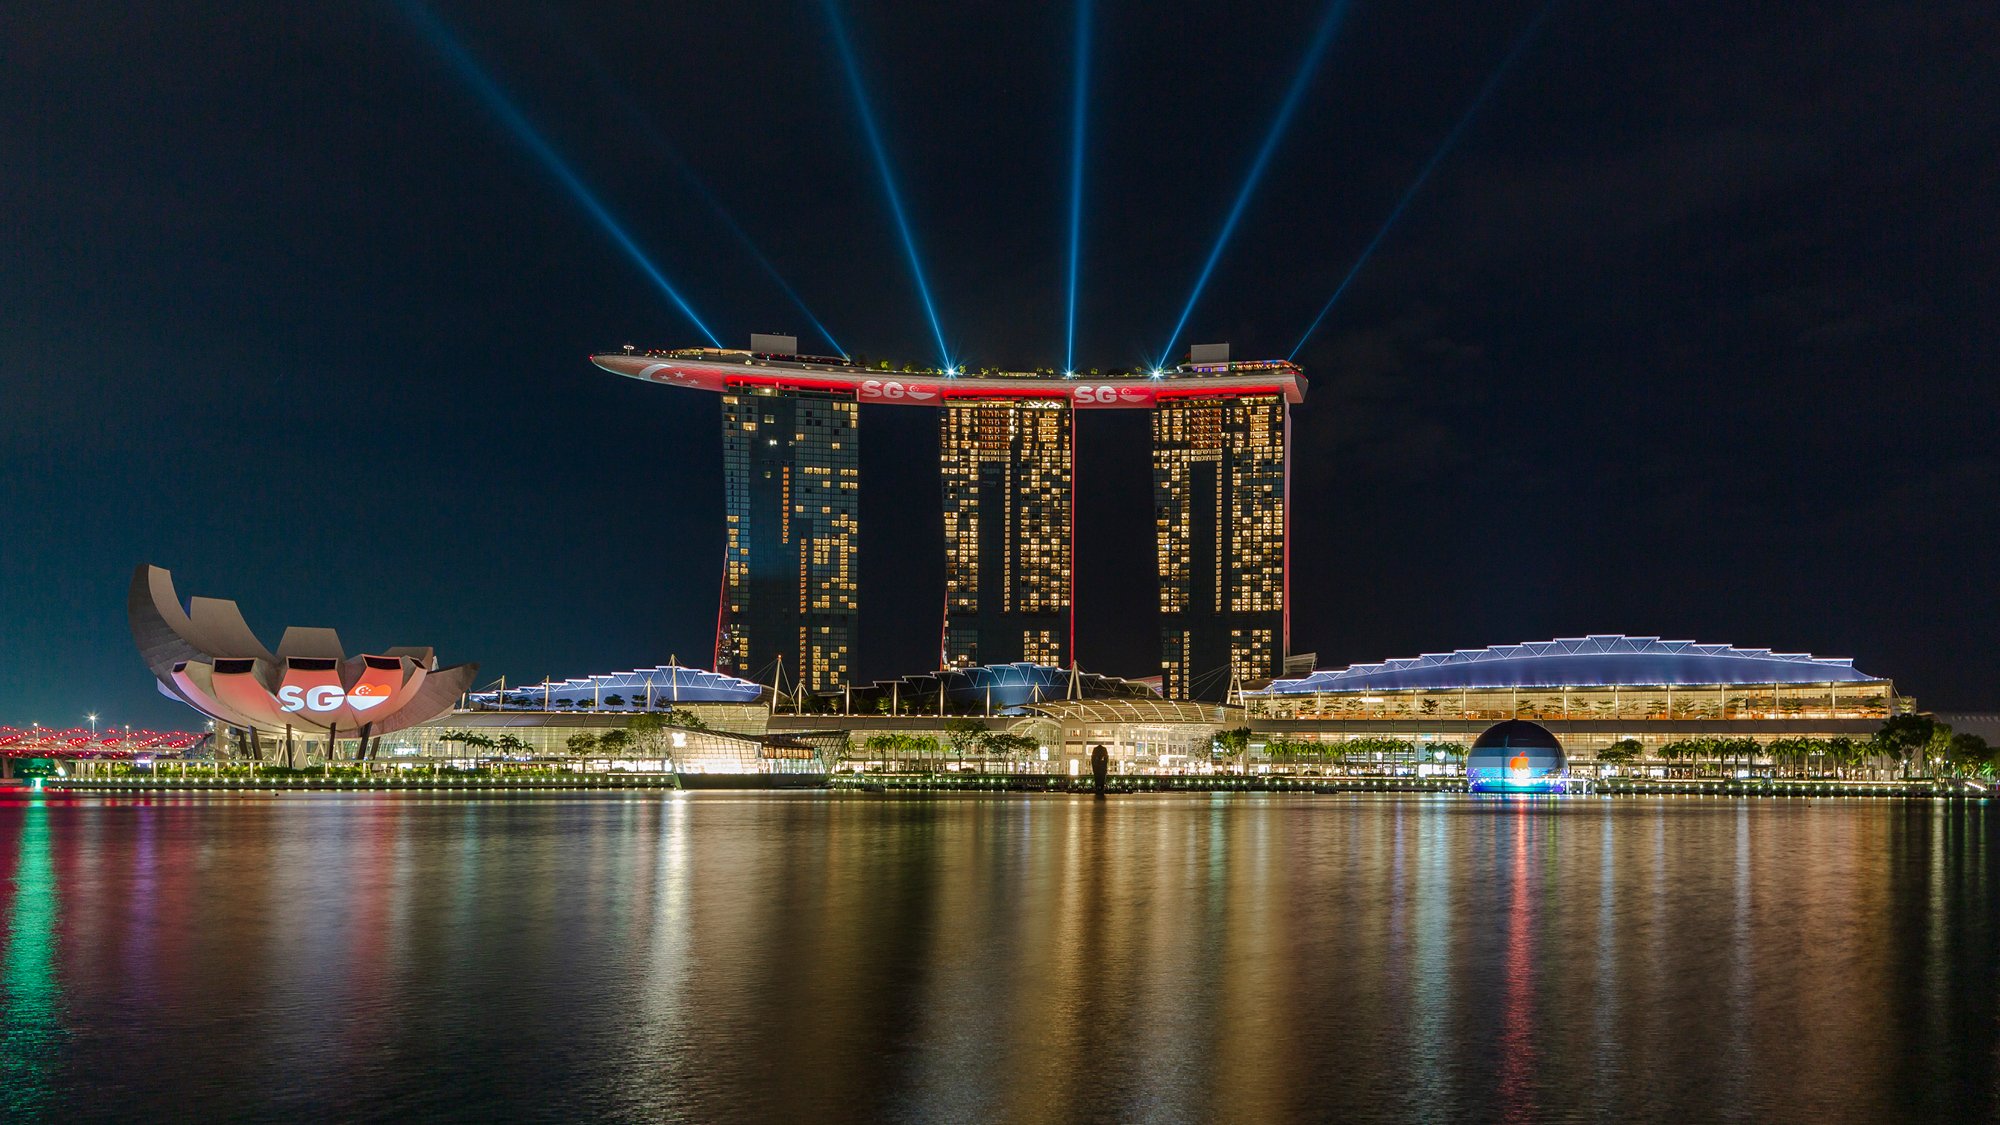 Marina Bay Sands: Is it really worth the money?